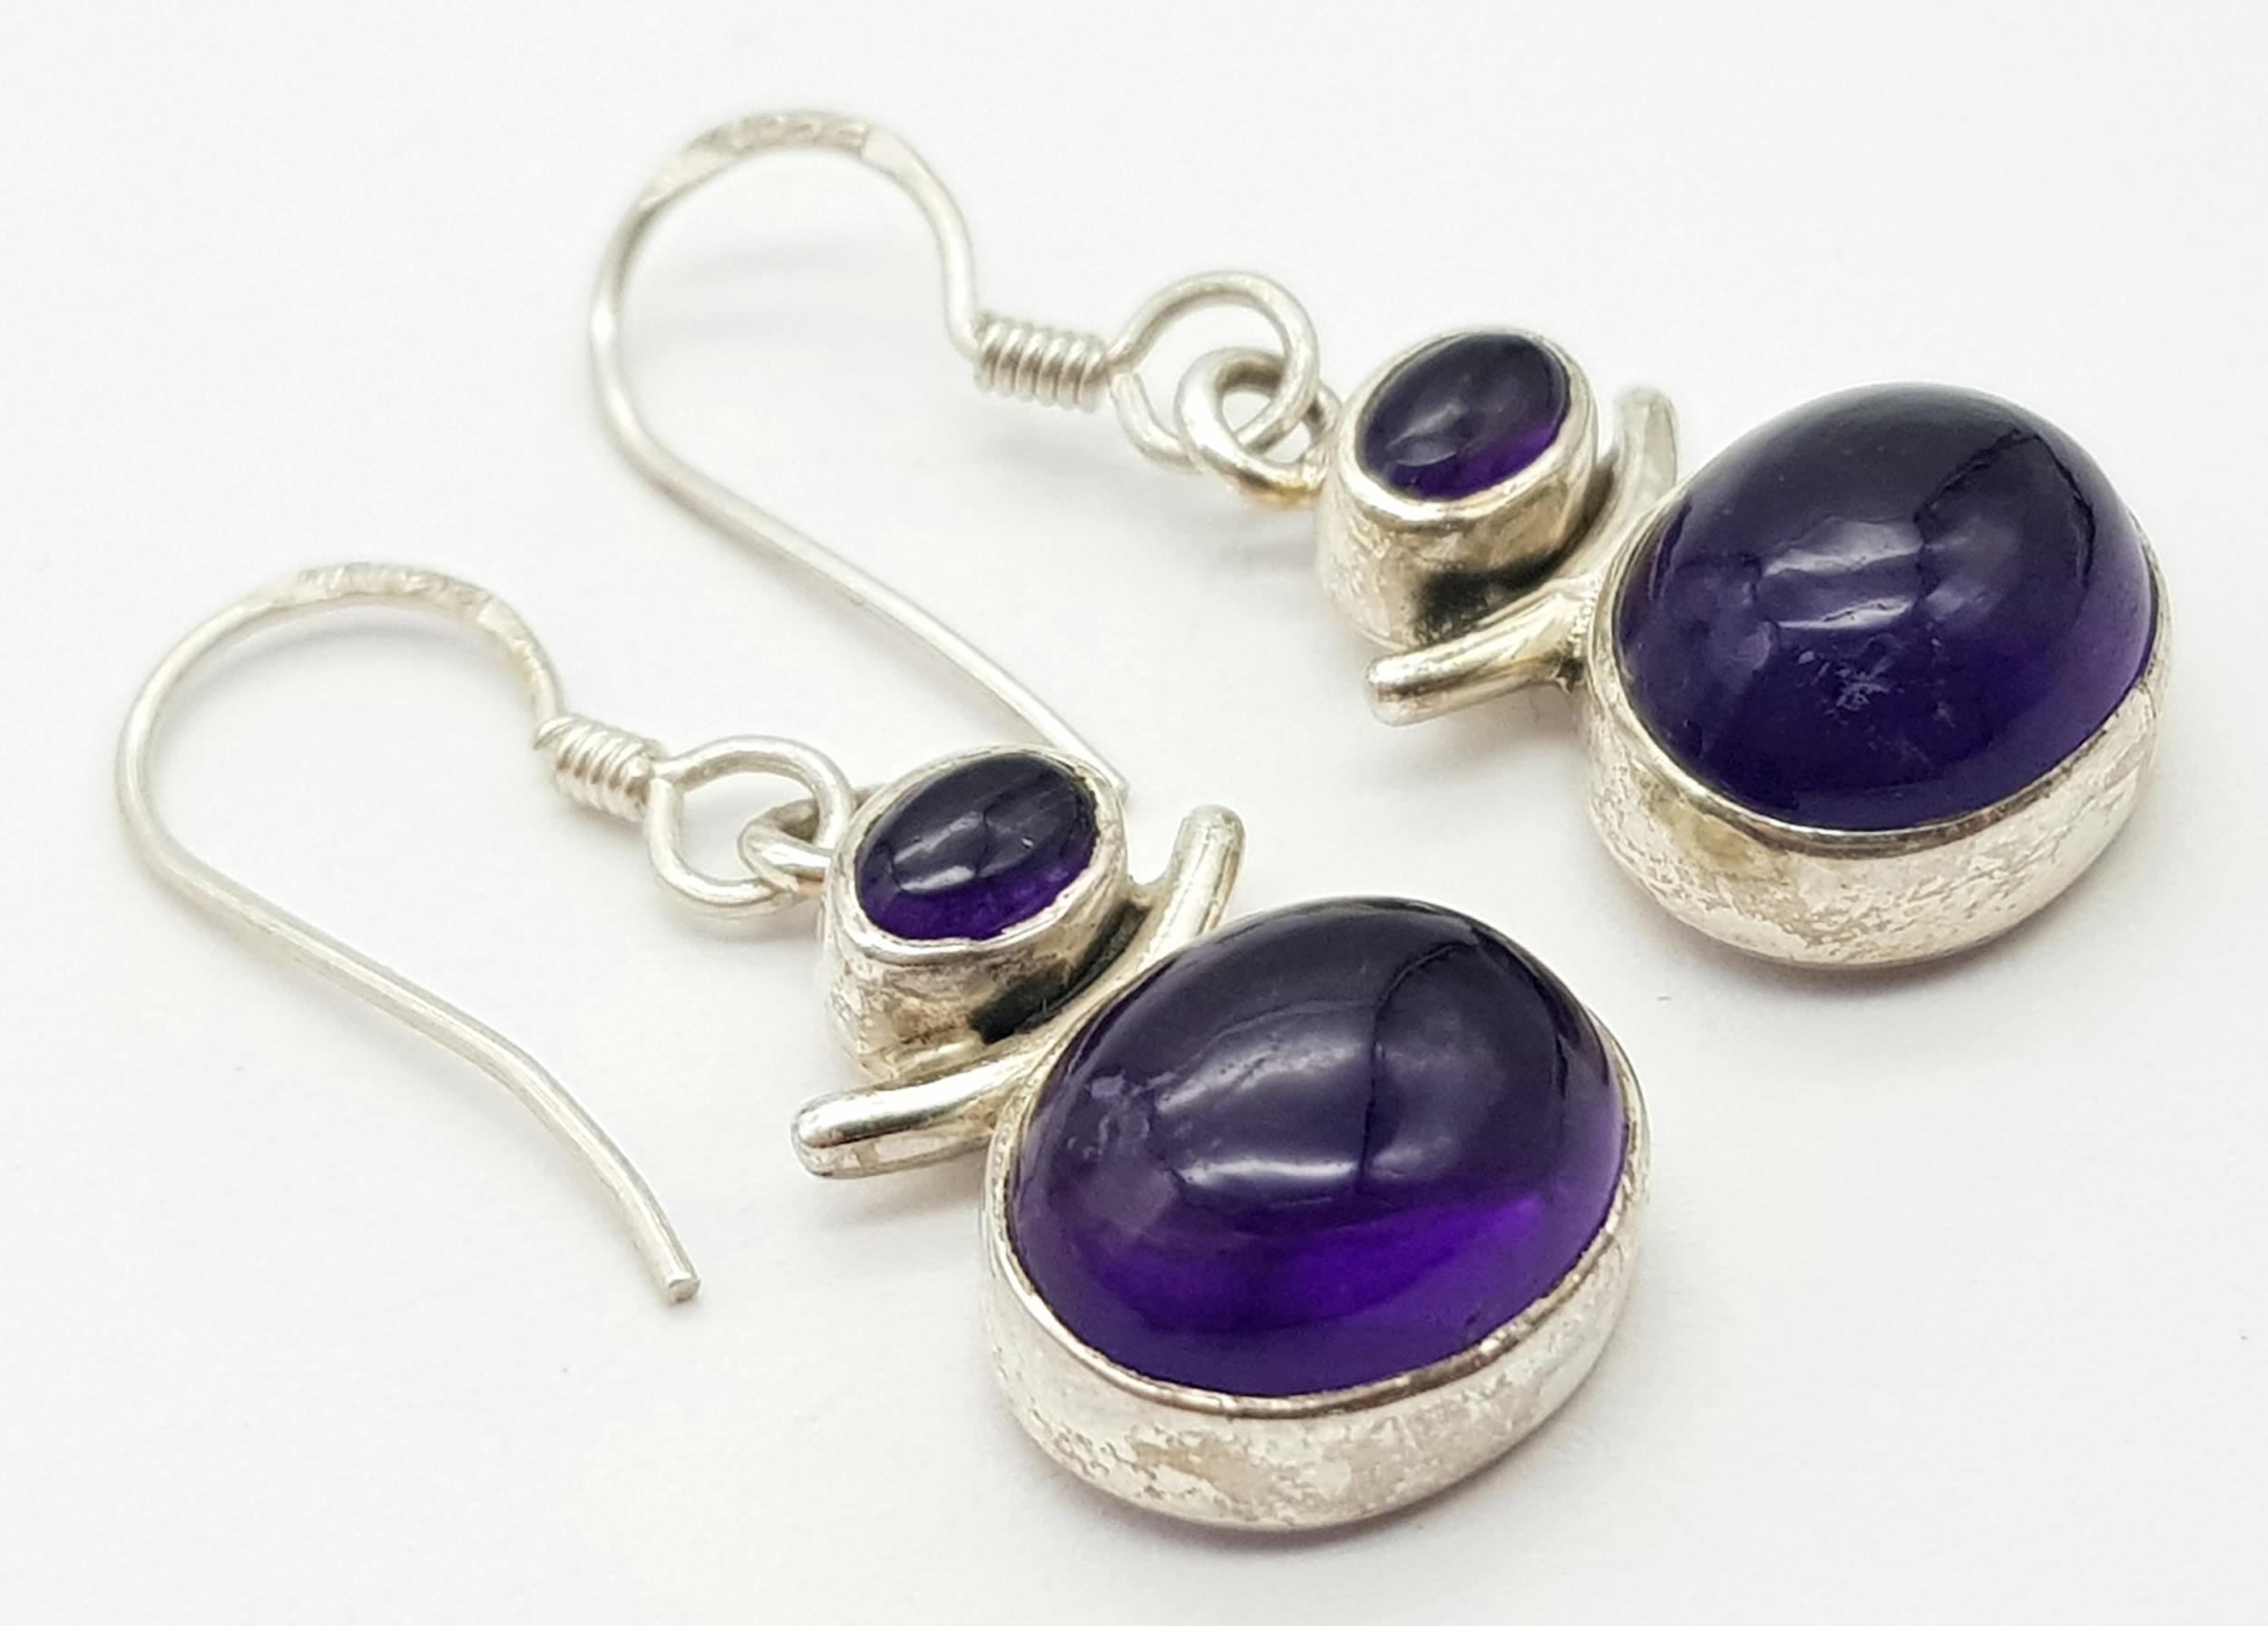 A Pair of Sterling Silver Oval Cut Amethyst Earrings. 3cm Drop. Set with a 1.2cm & 6mm Amethyst - Image 2 of 4